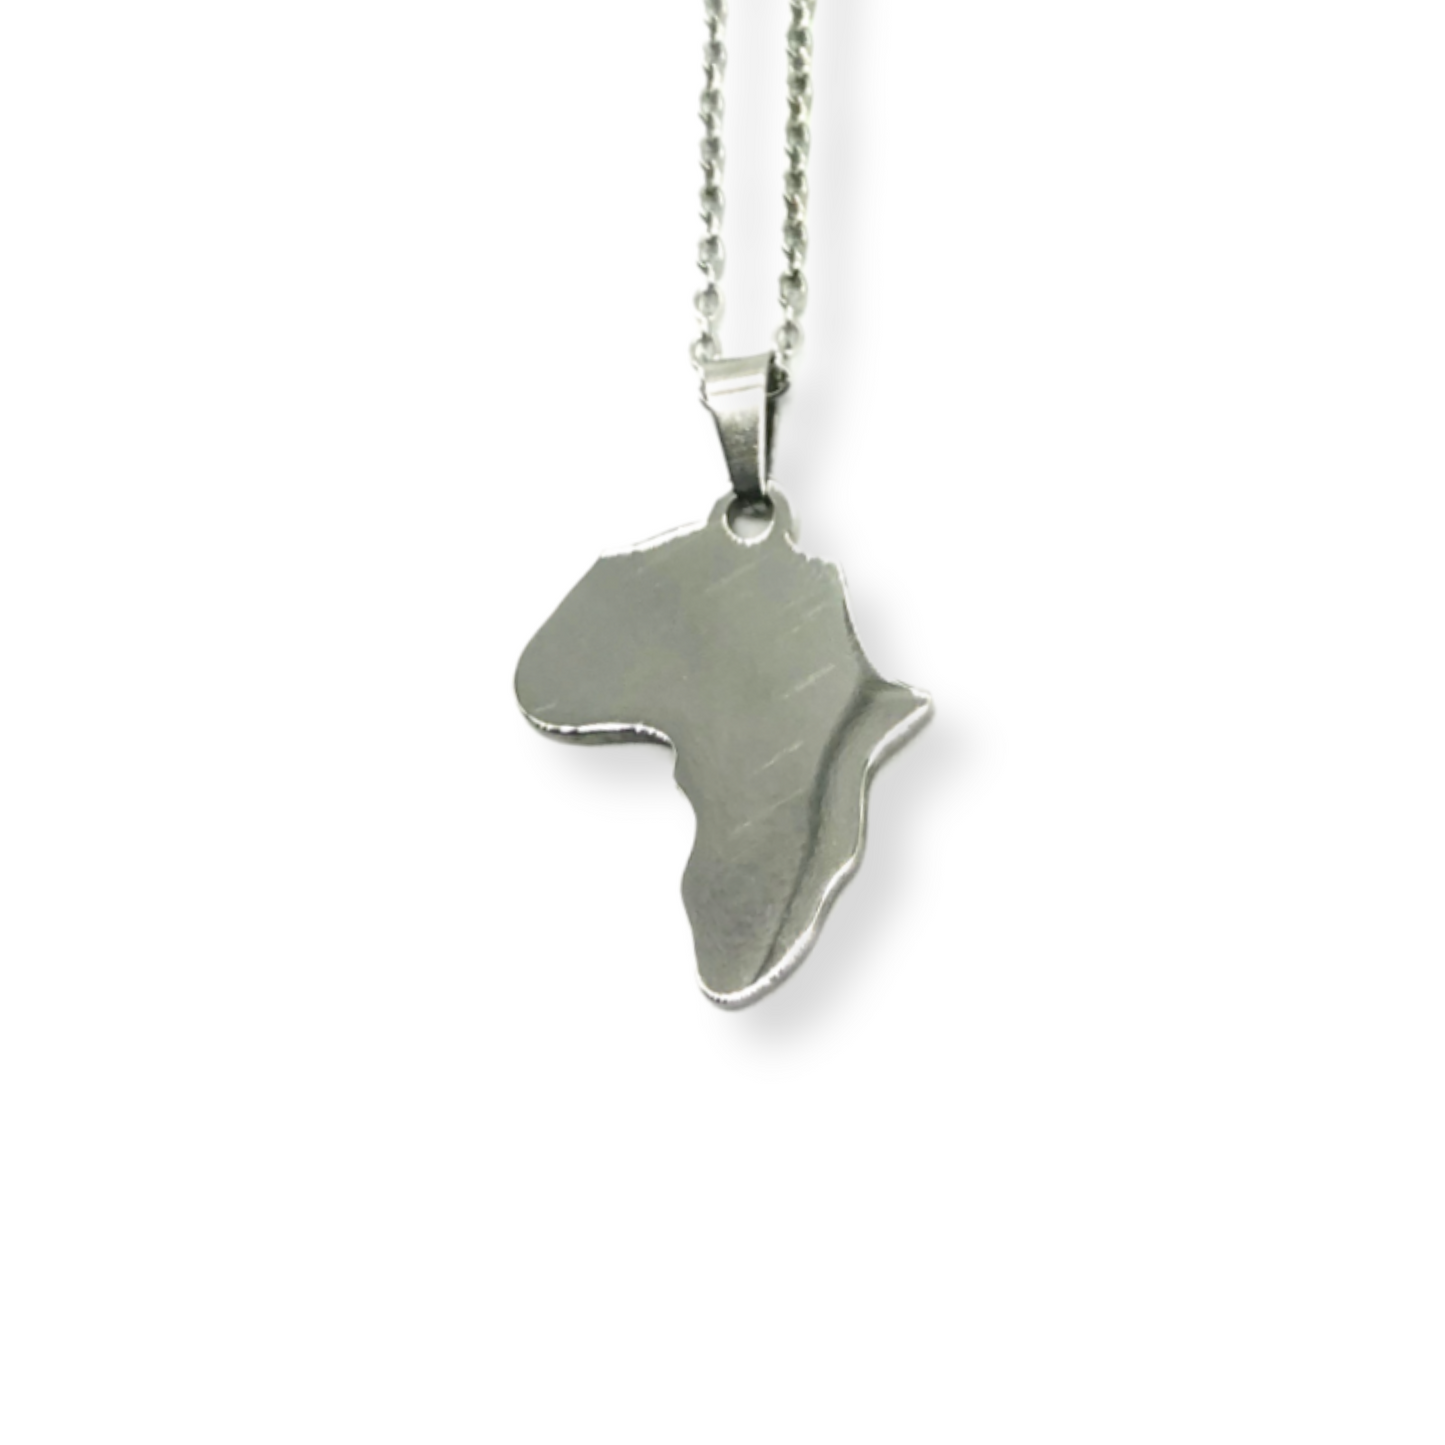 "One Africa" Continent Necklace